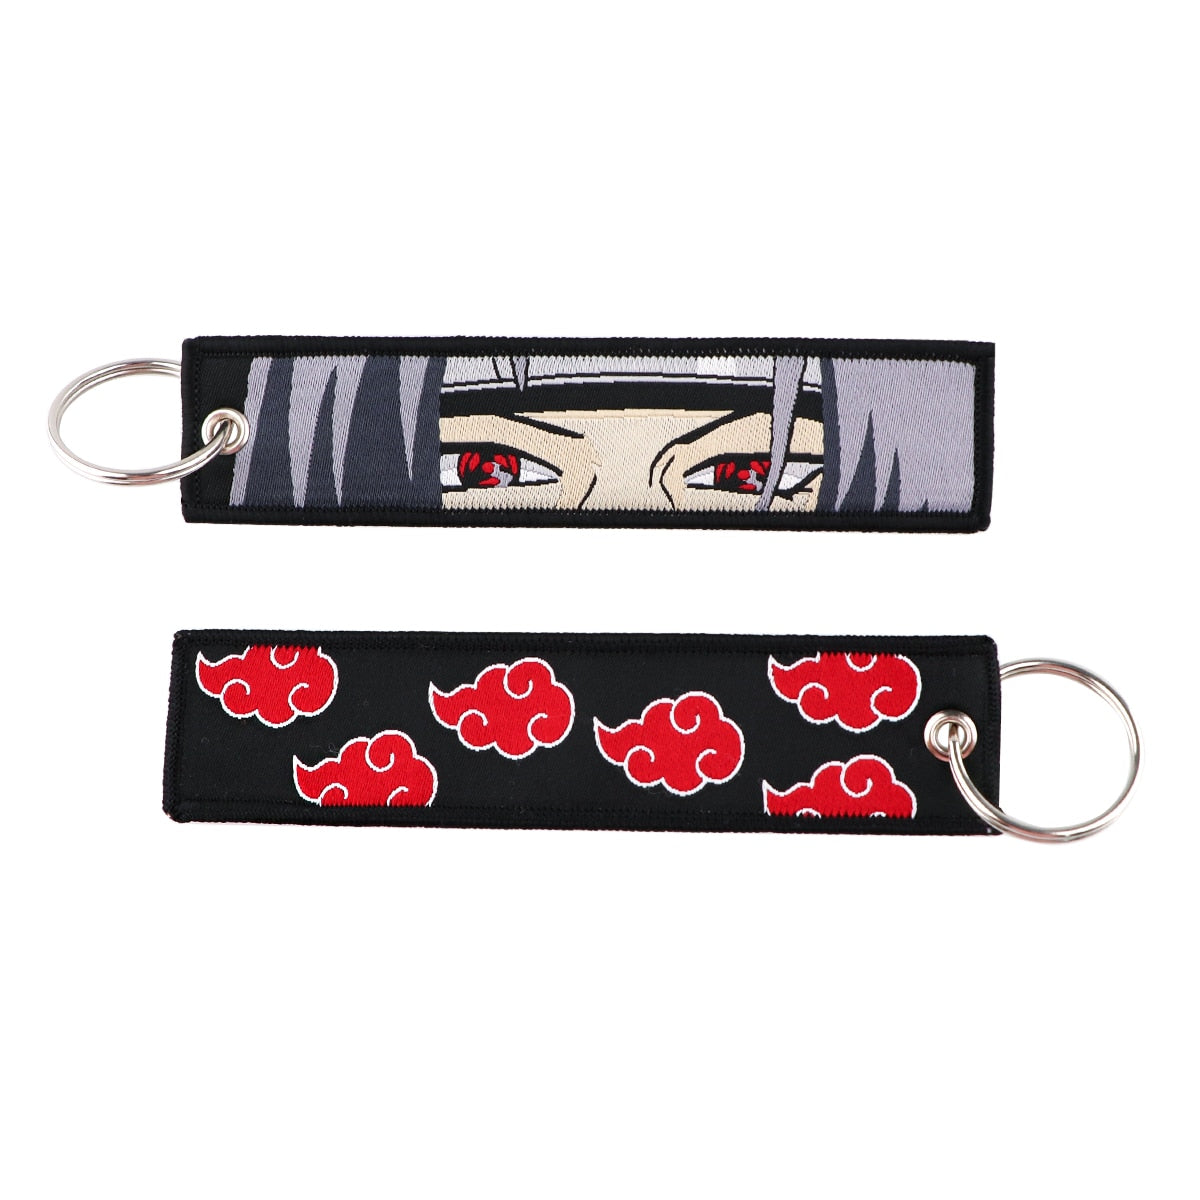 Naruto Embroidered Keychain Key Ring 2